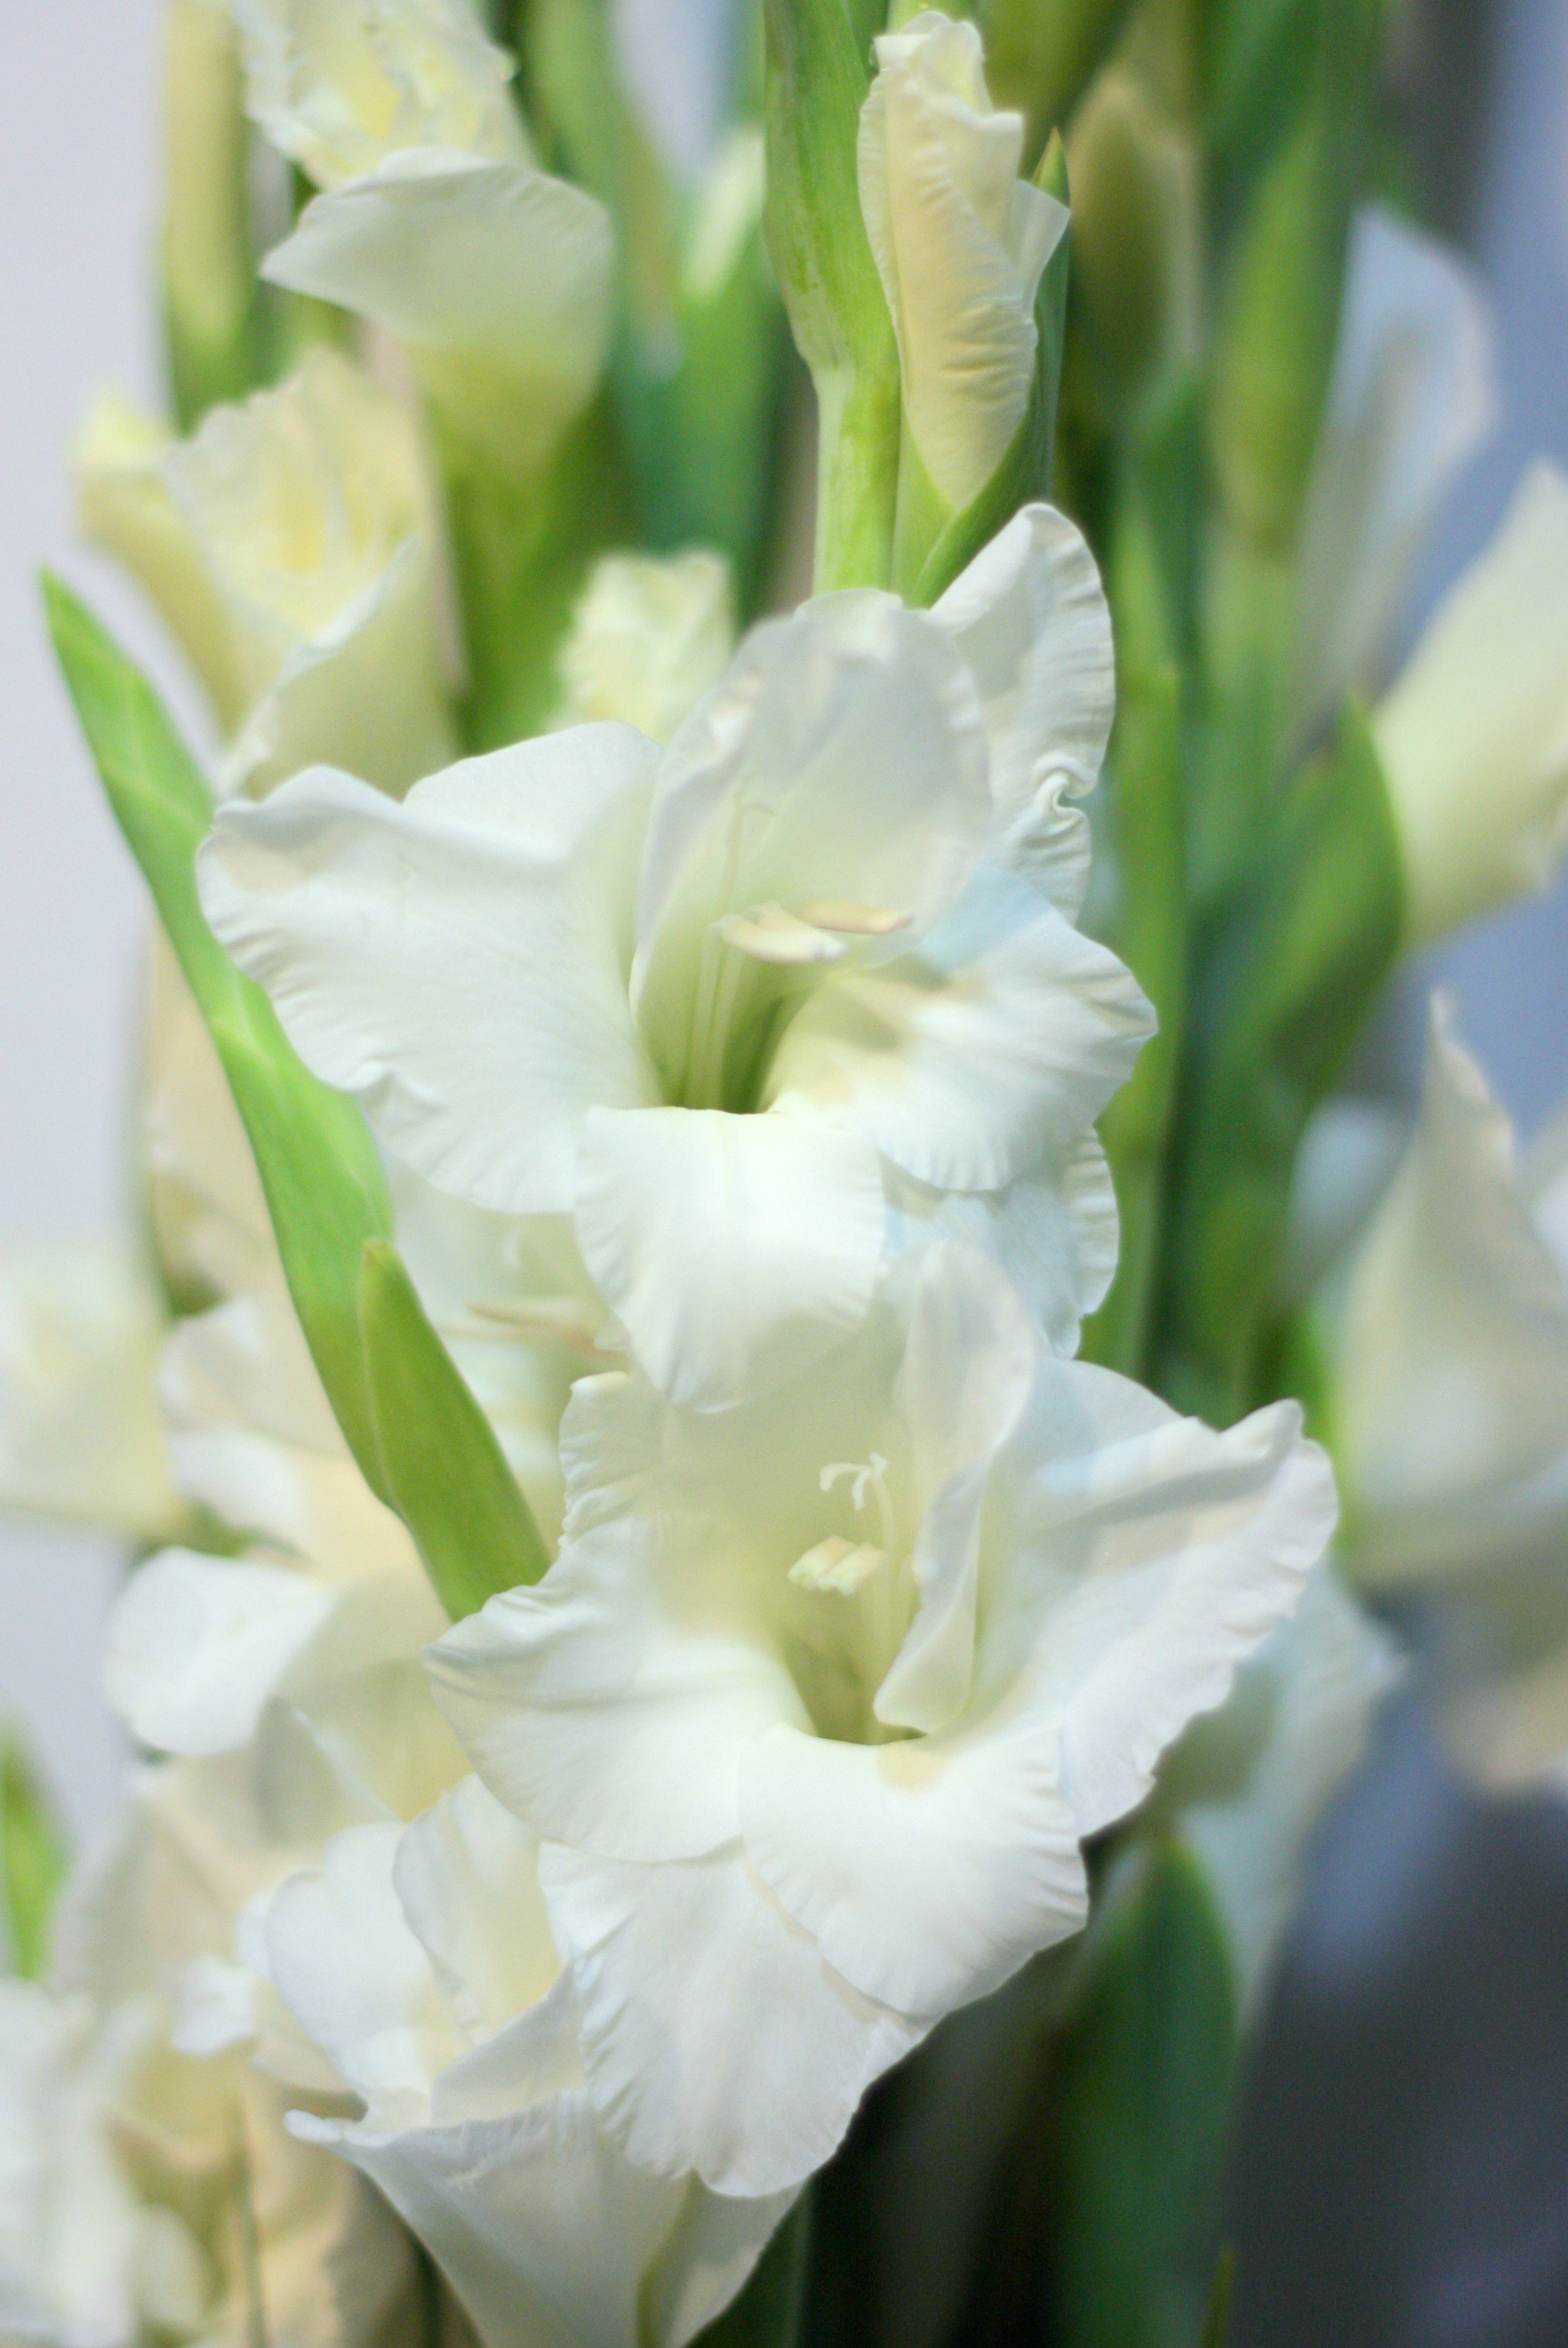 28 Wonderful Gladiolus Vase 2023 free download gladiolus vase of gladiolus flowers pinterest gladiolus beautiful flowers and intended for white gladiolus